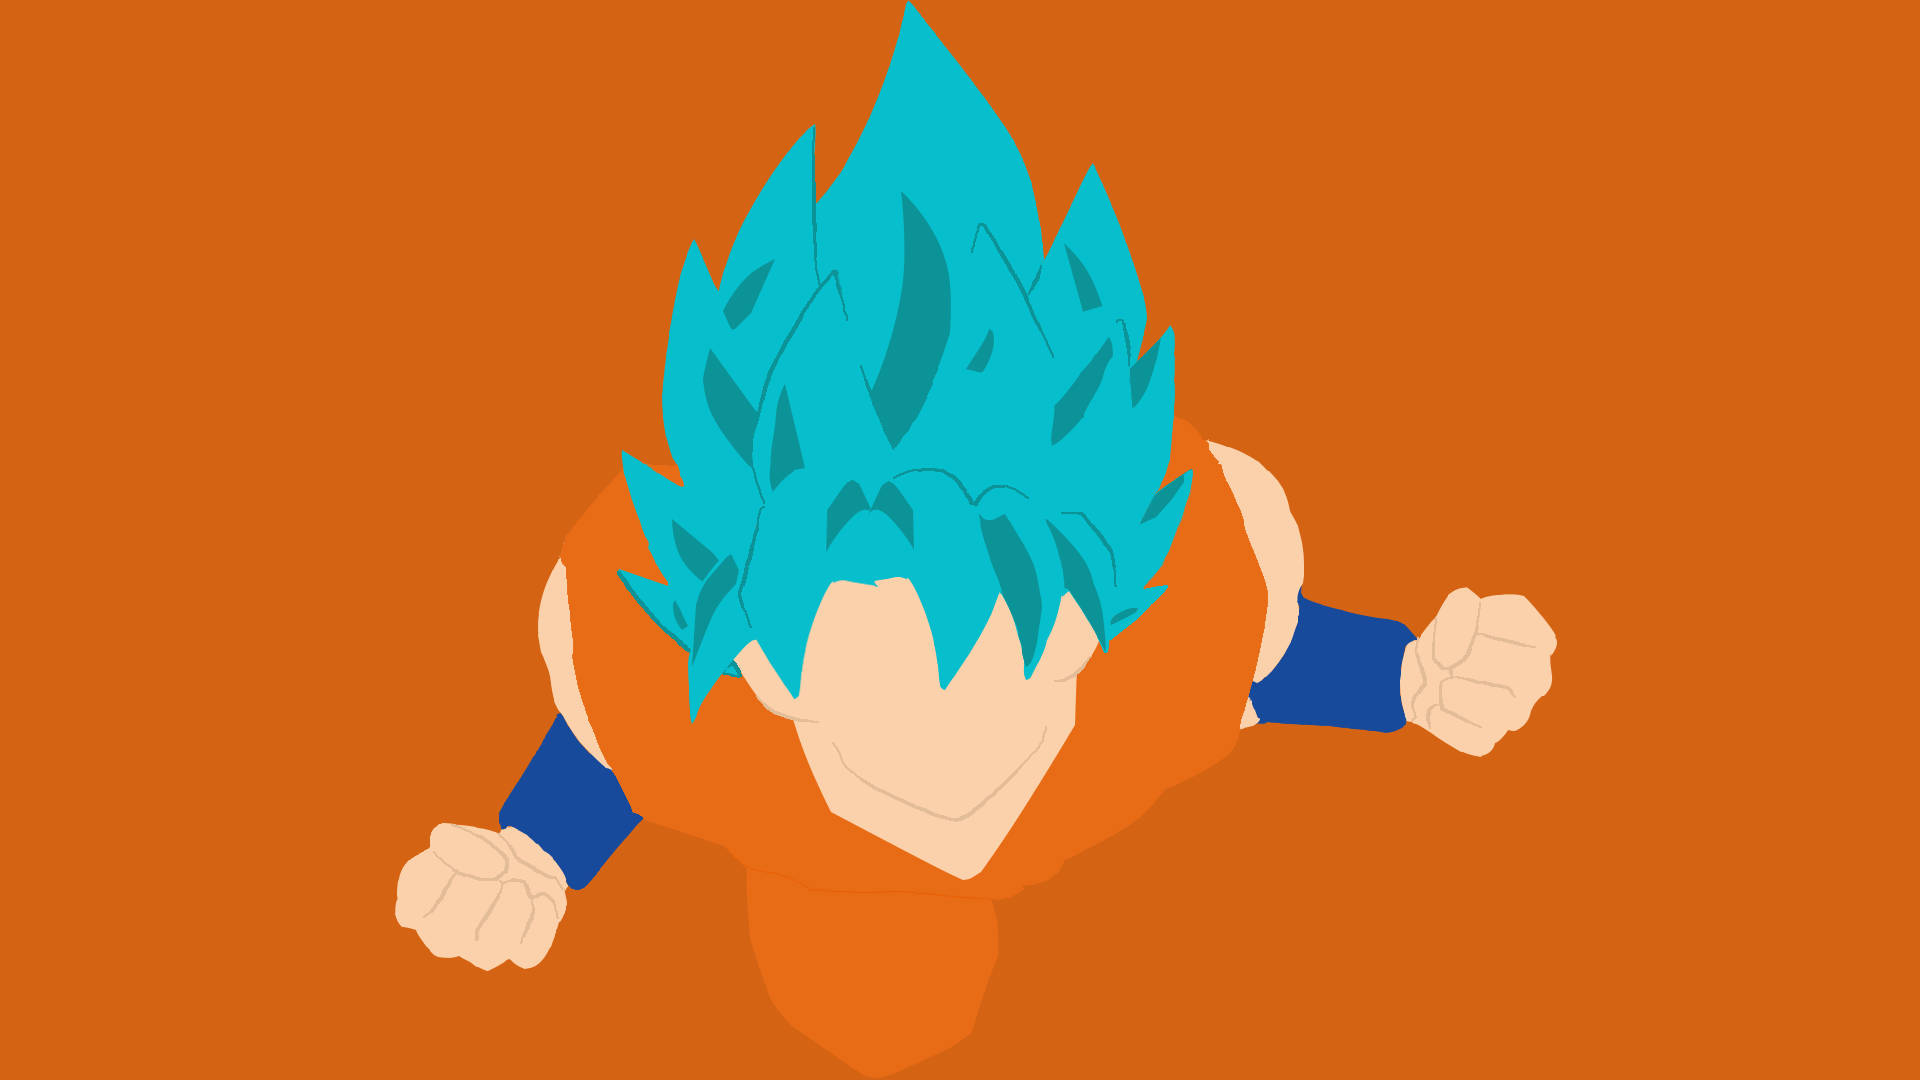 Goku primed and ready to fight Wallpaper